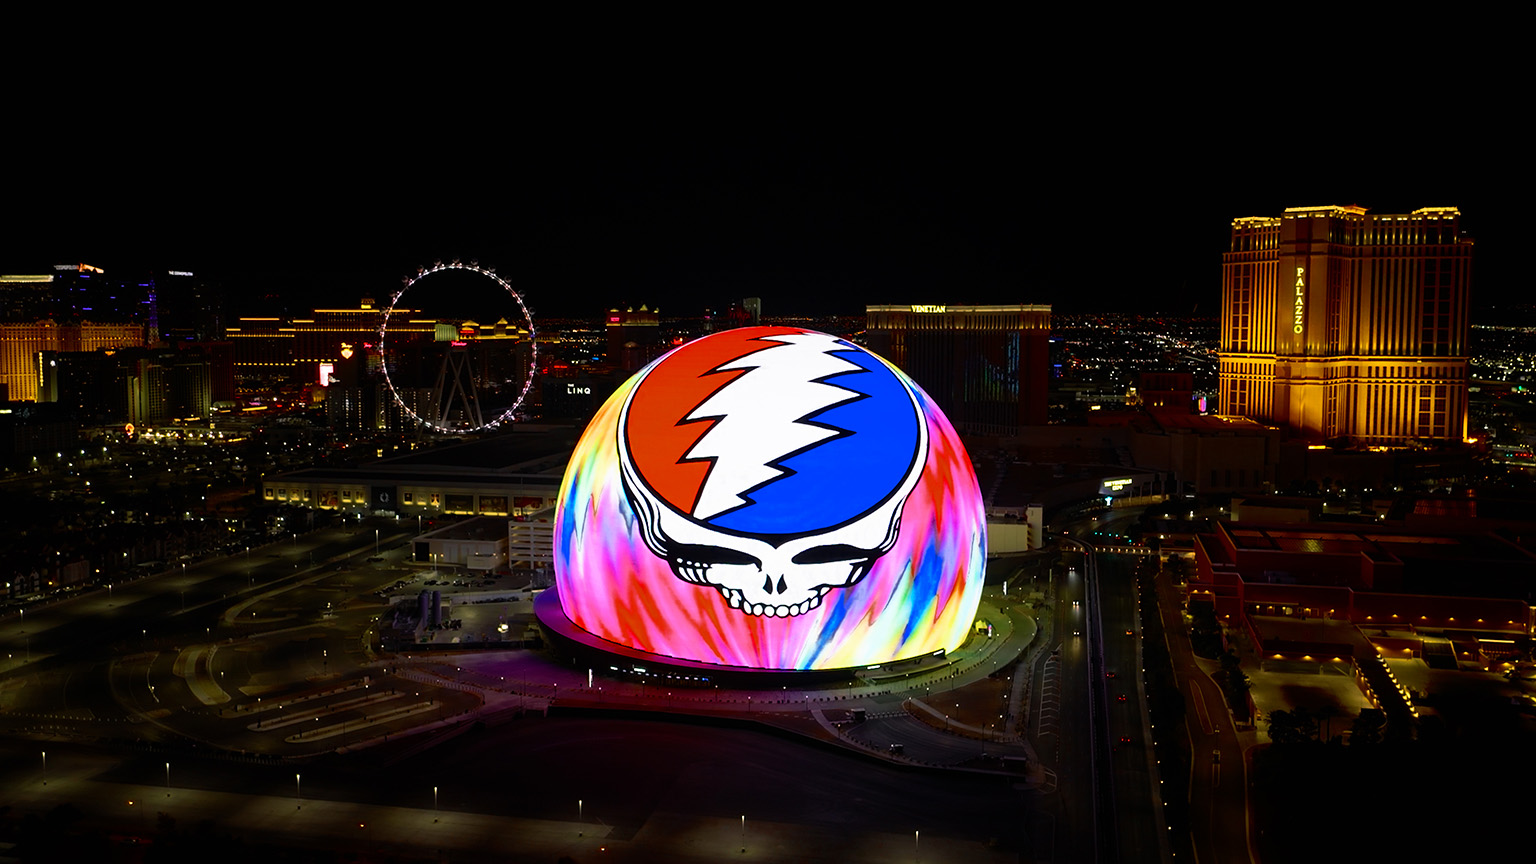 Dead & Company has announced an exclusive residency at SPHERE in Las Vegas